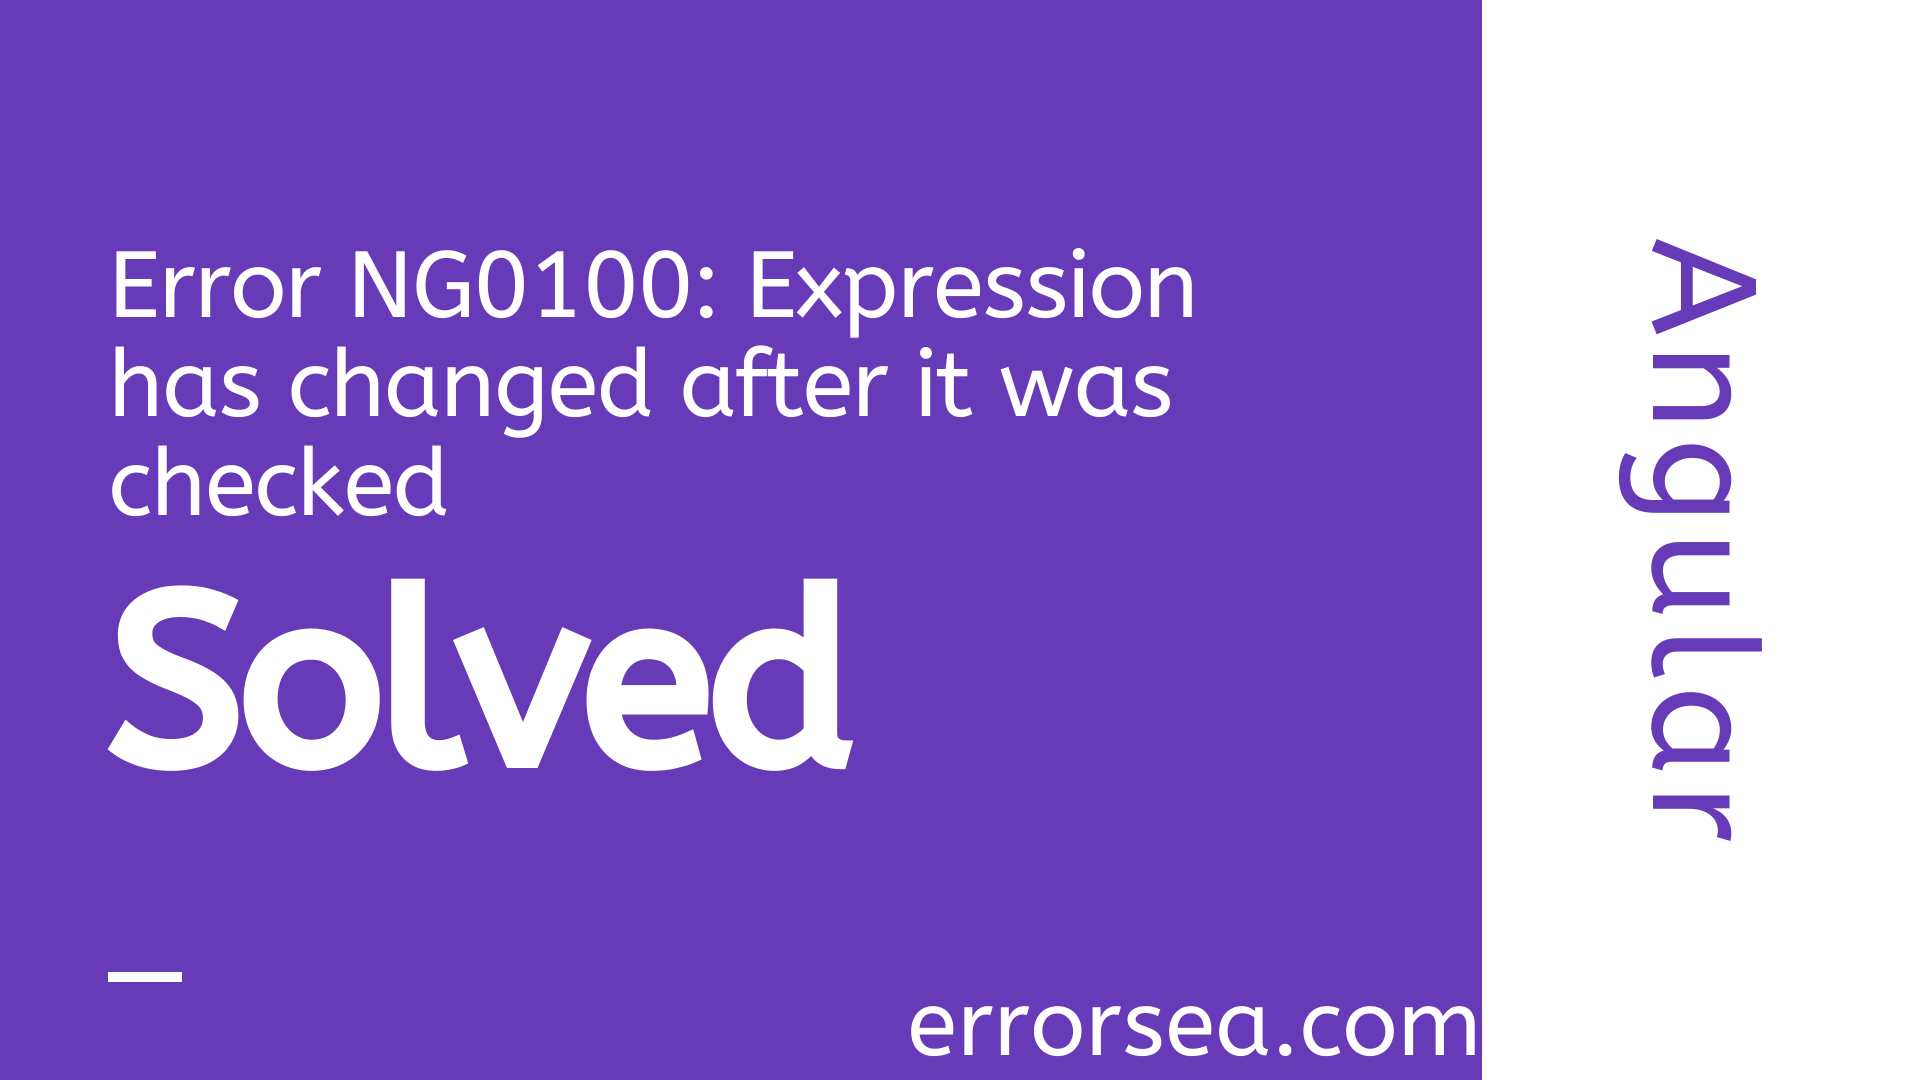 [Solved] Error NG0100: Expression has changed after it was checked